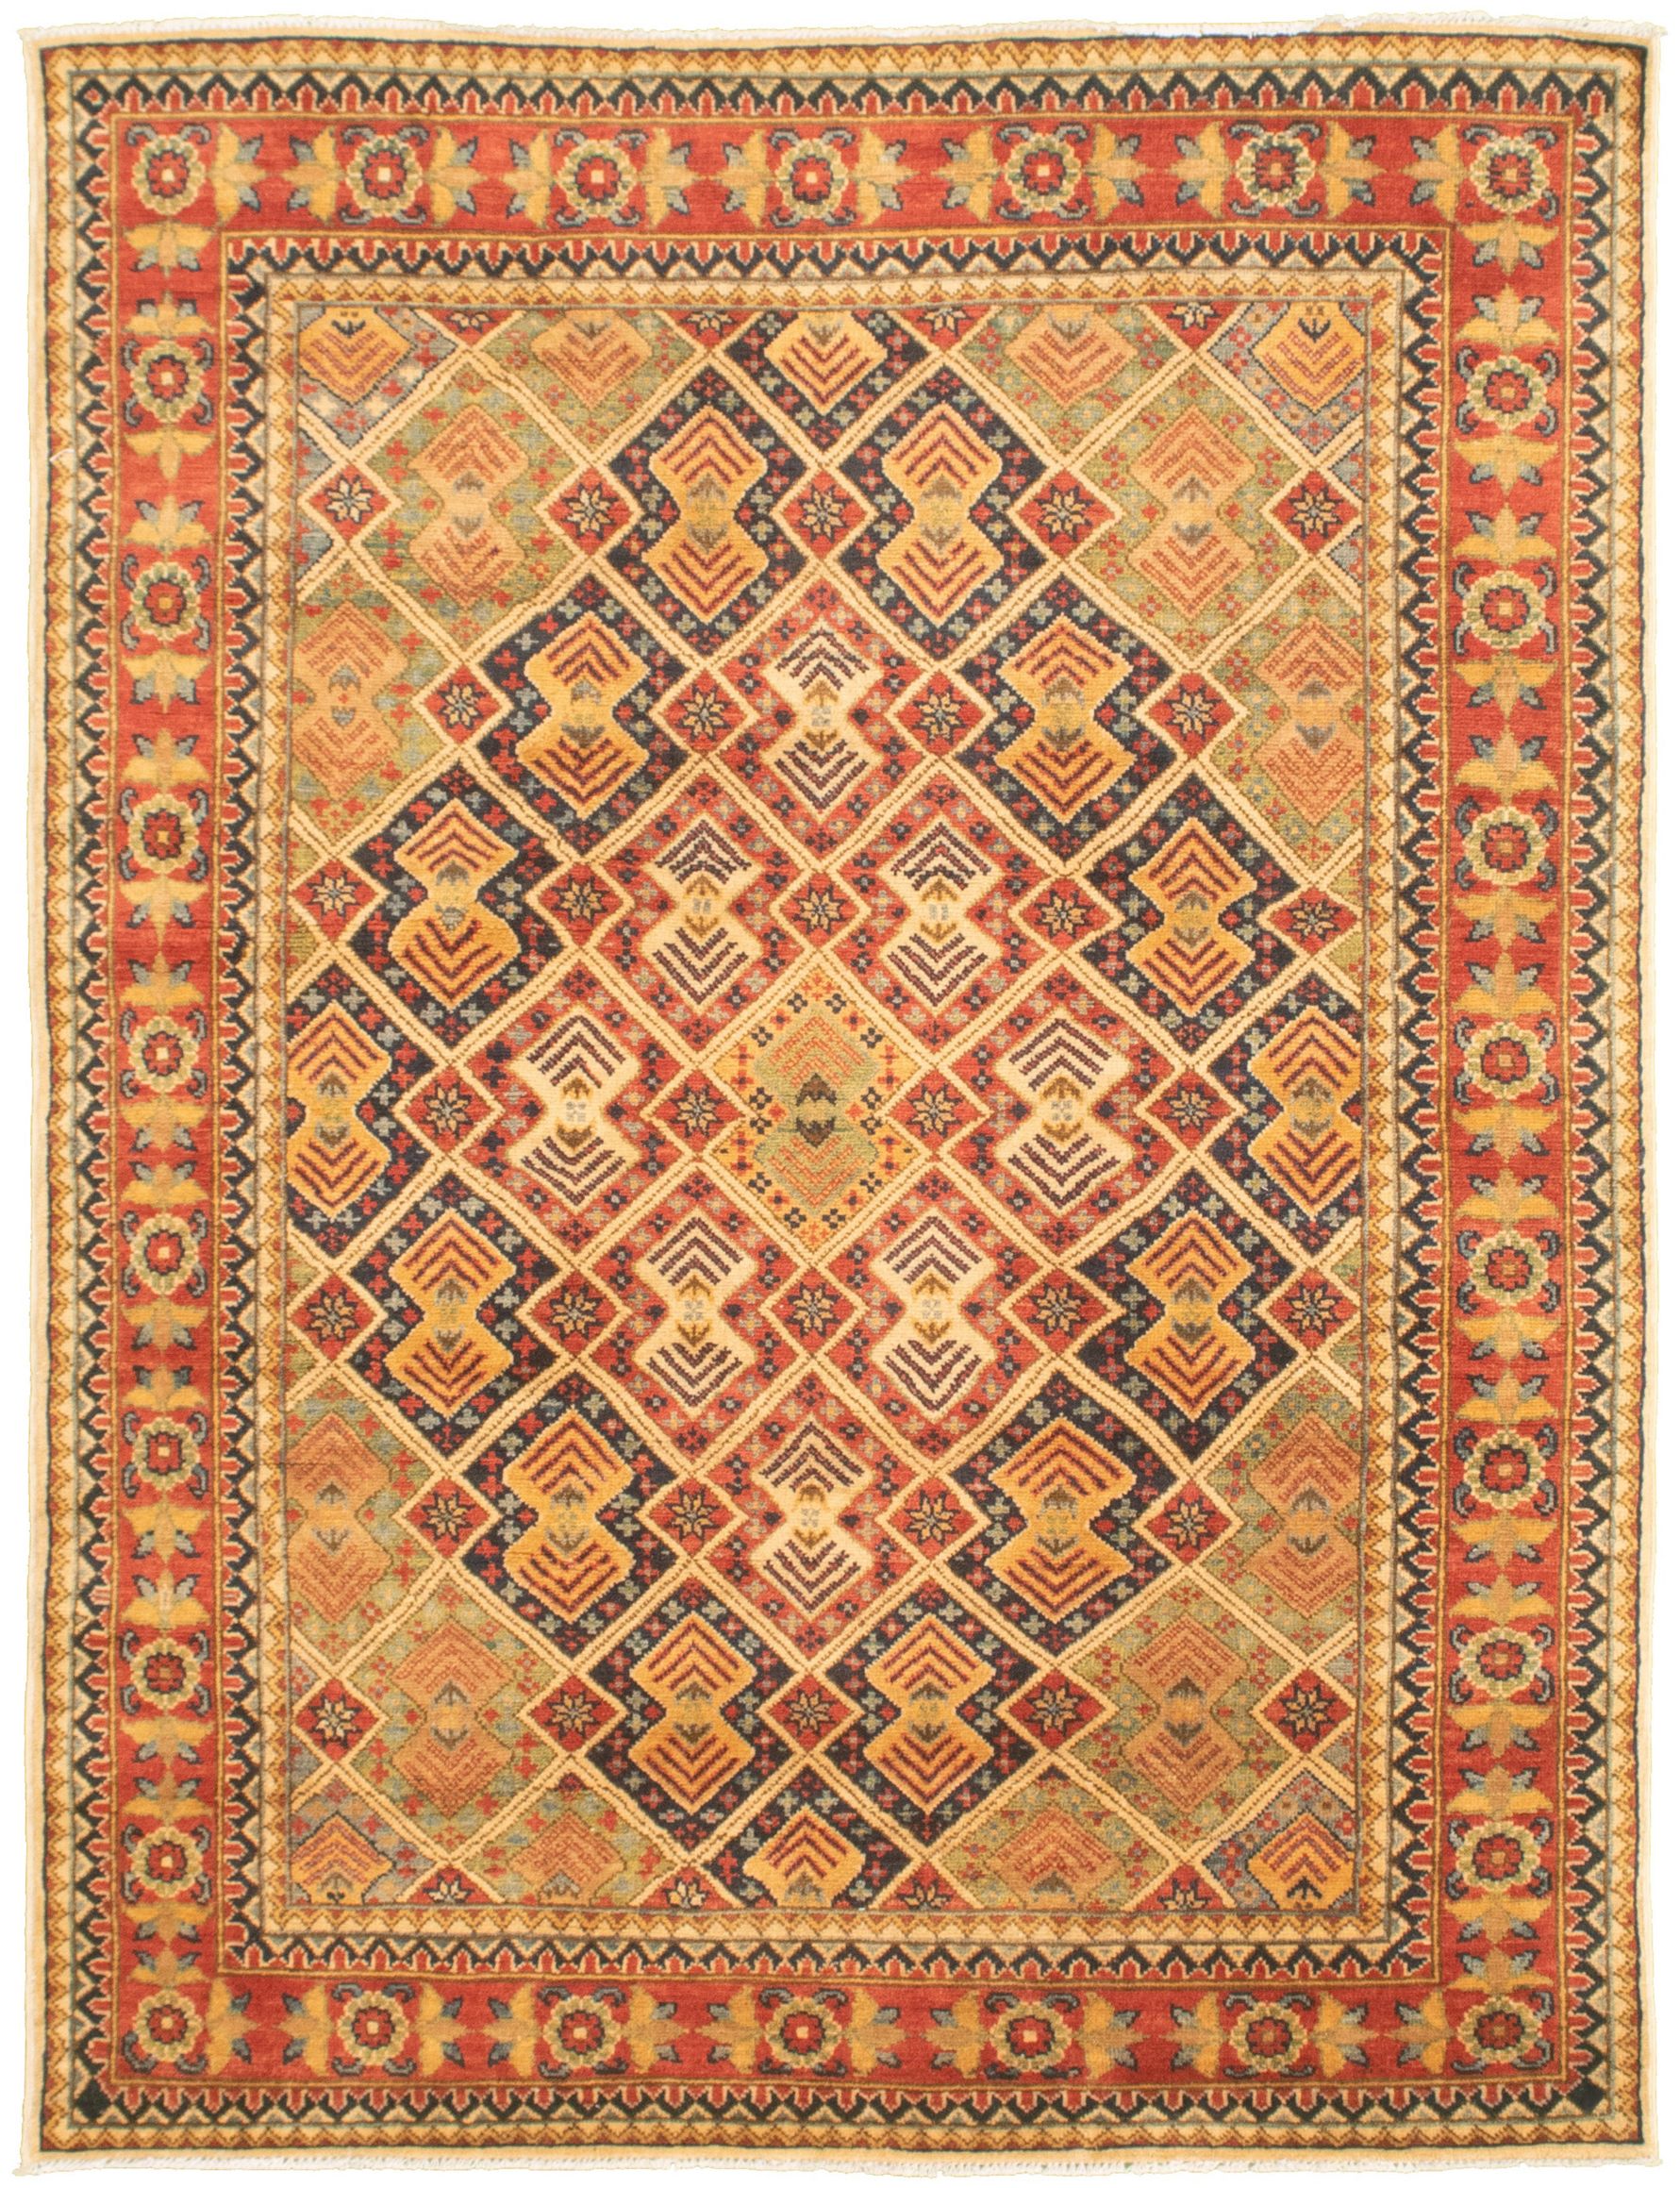 eCarpet Gallery 334910 Red Area Rug 3'5 x 5'0 Carved 